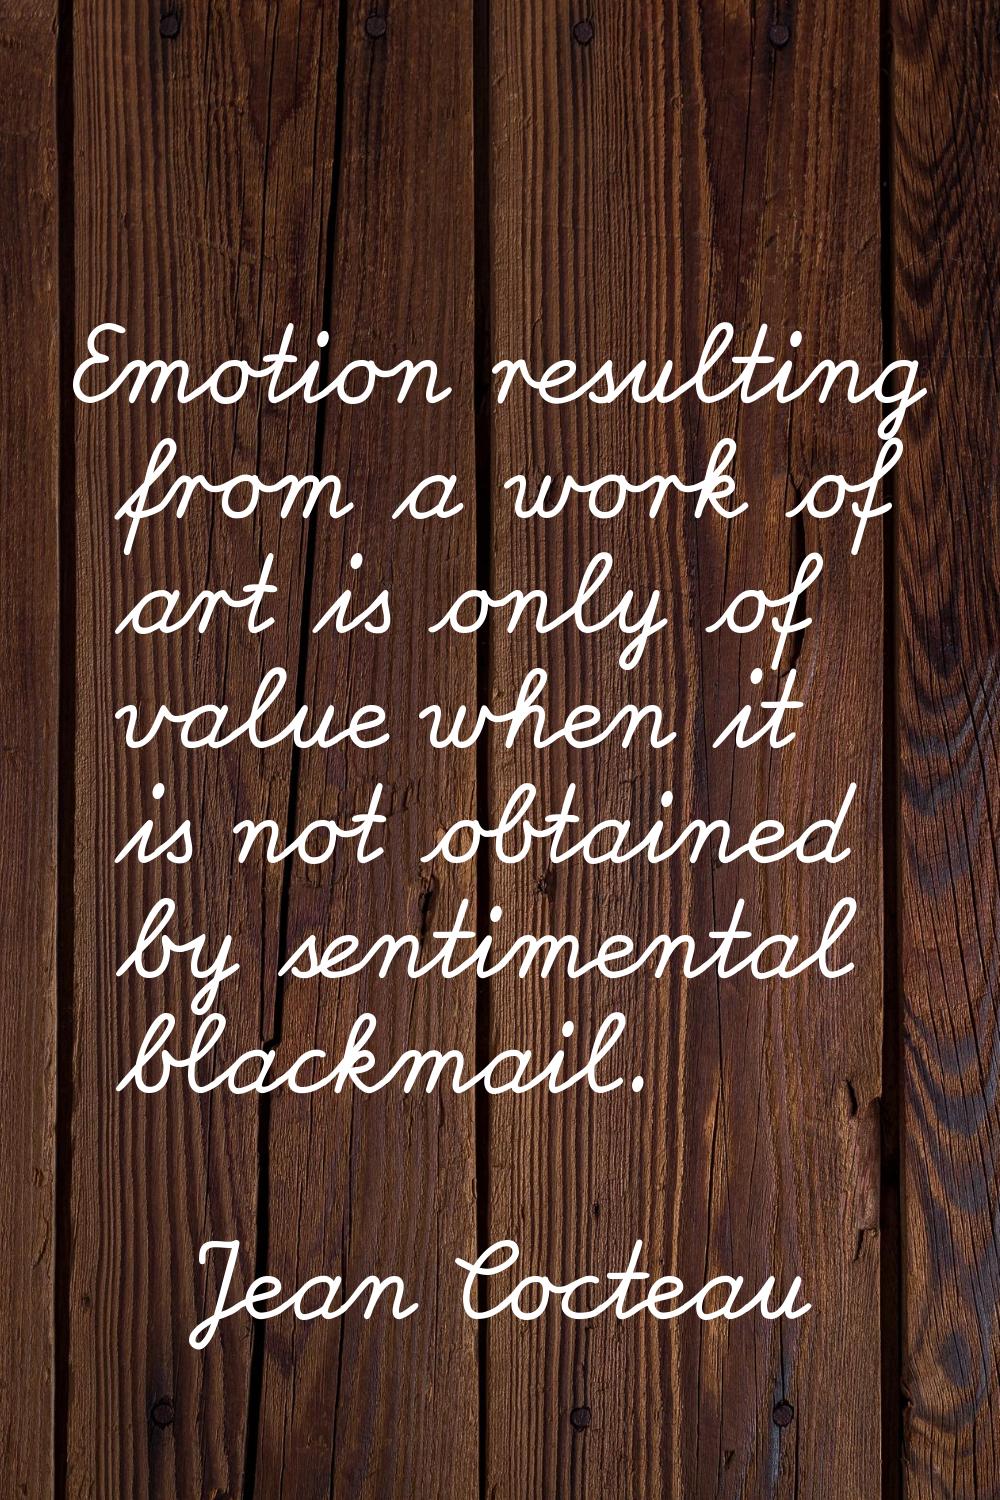 Emotion resulting from a work of art is only of value when it is not obtained by sentimental blackm